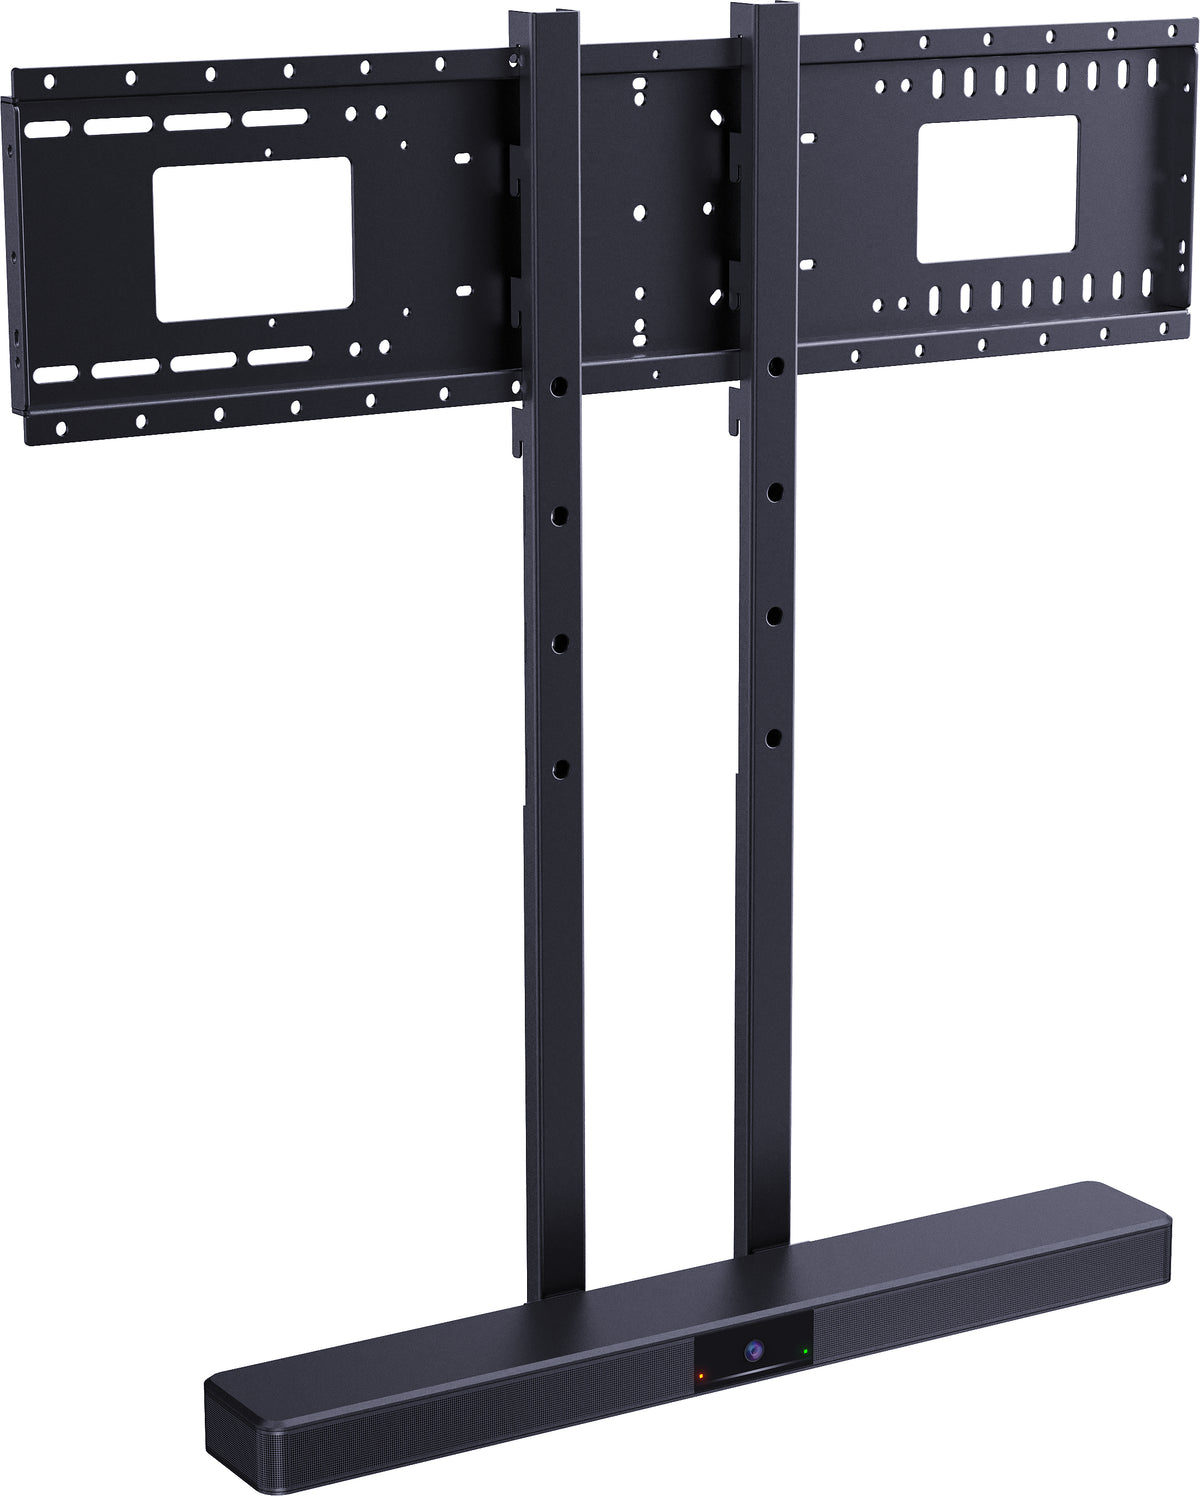 VISION Laptop Shelf - LIFETIME WARRANTY - hangs from VFM-W Heavy Duty Wall Mounts - three height options at 80 mm, 3.1" increments - max drop 700 mm, 27.6" below centre of screen - also compatible with VFM-F40 floor stands - black